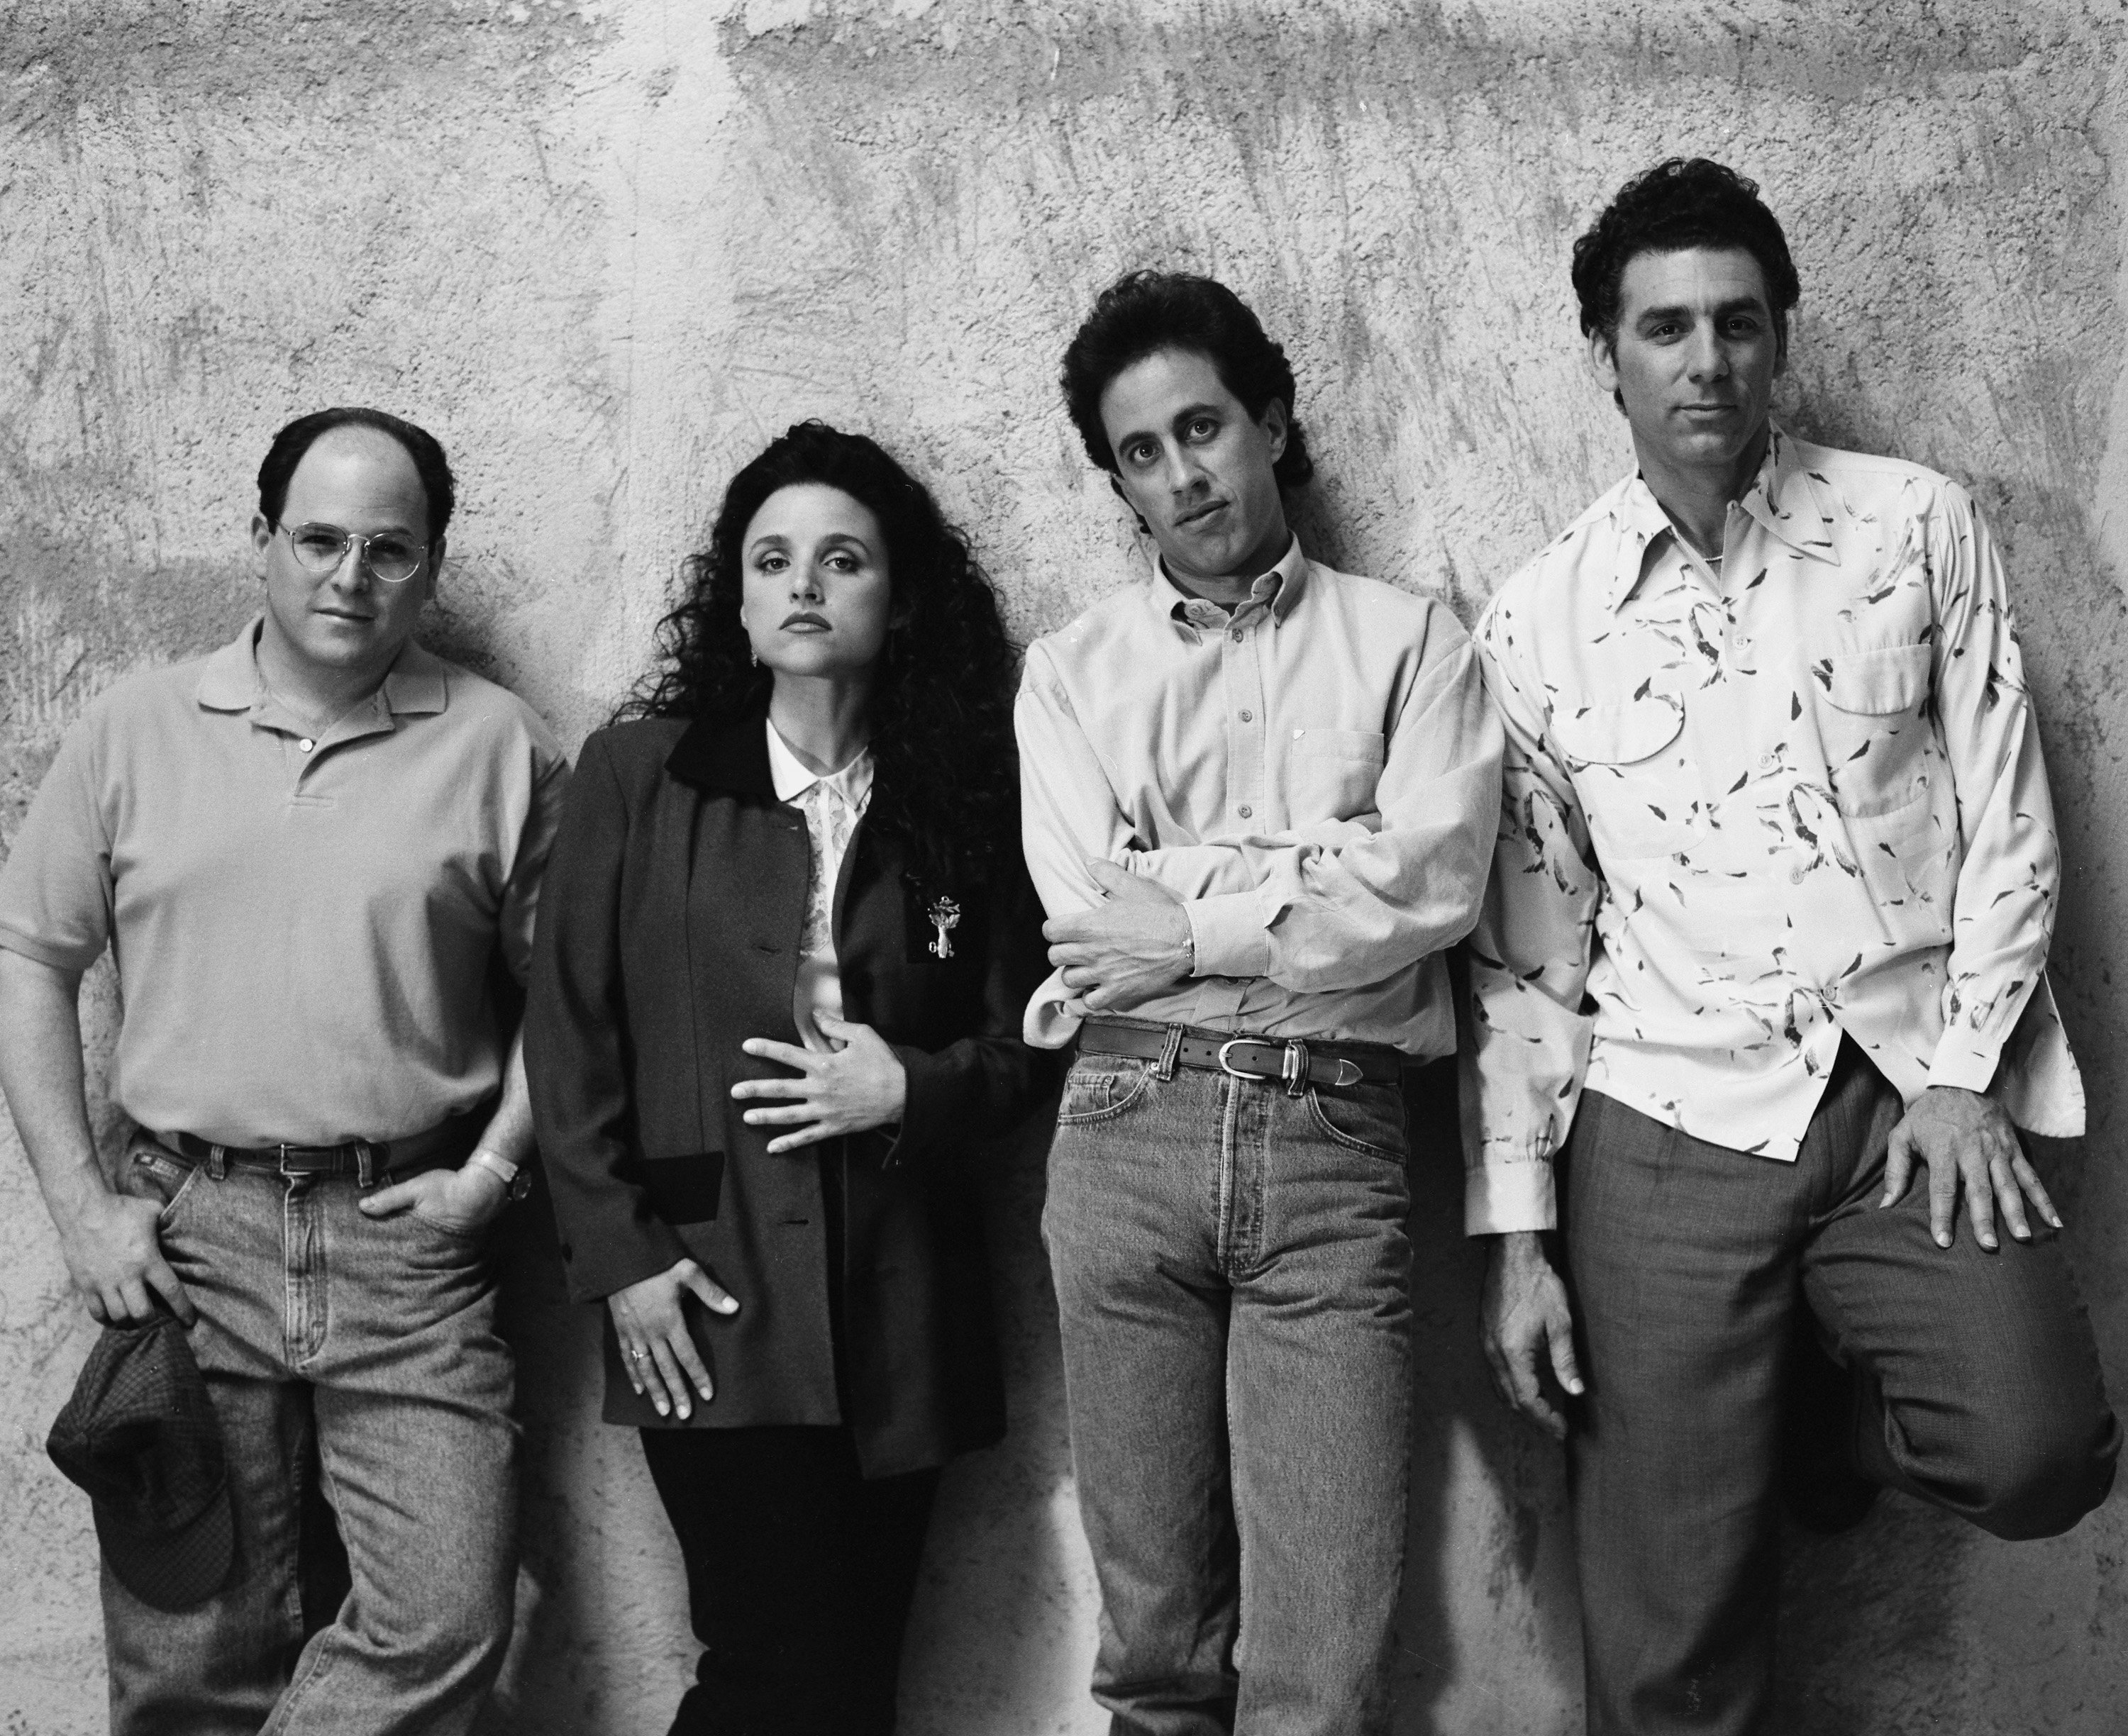 Jason Alexander as George Costanza, Julia Louis-Dreyfus as Elaine Benes, Jerry Seinfeld as Jerry Seinfeld and Michael Richards as Cosmo Kramer in a promotional photo for 'Seinfeld'